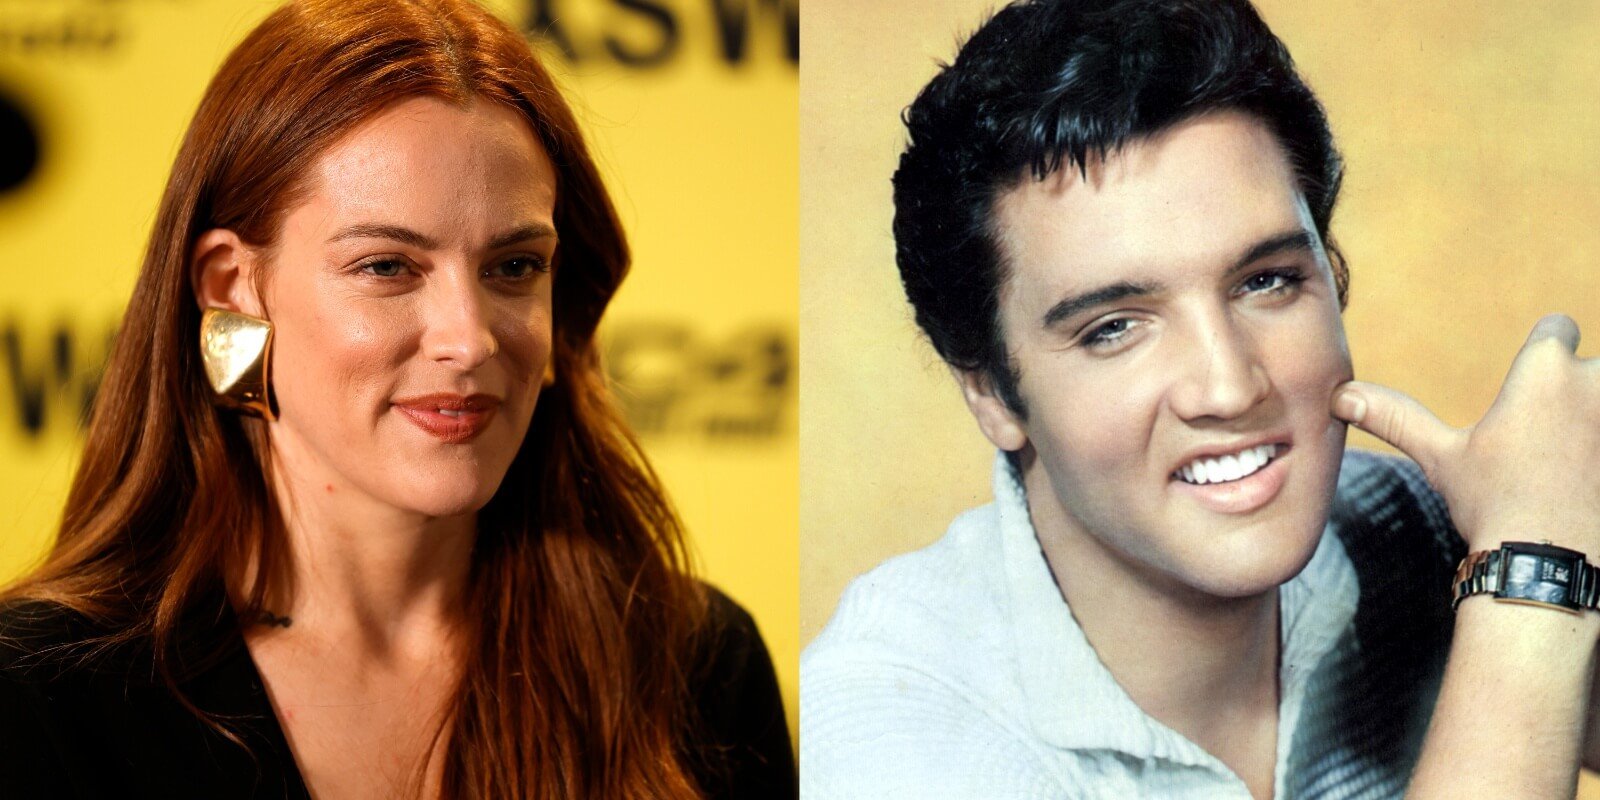 Riley Keough and Elvis Presley in side-by-side photographs.